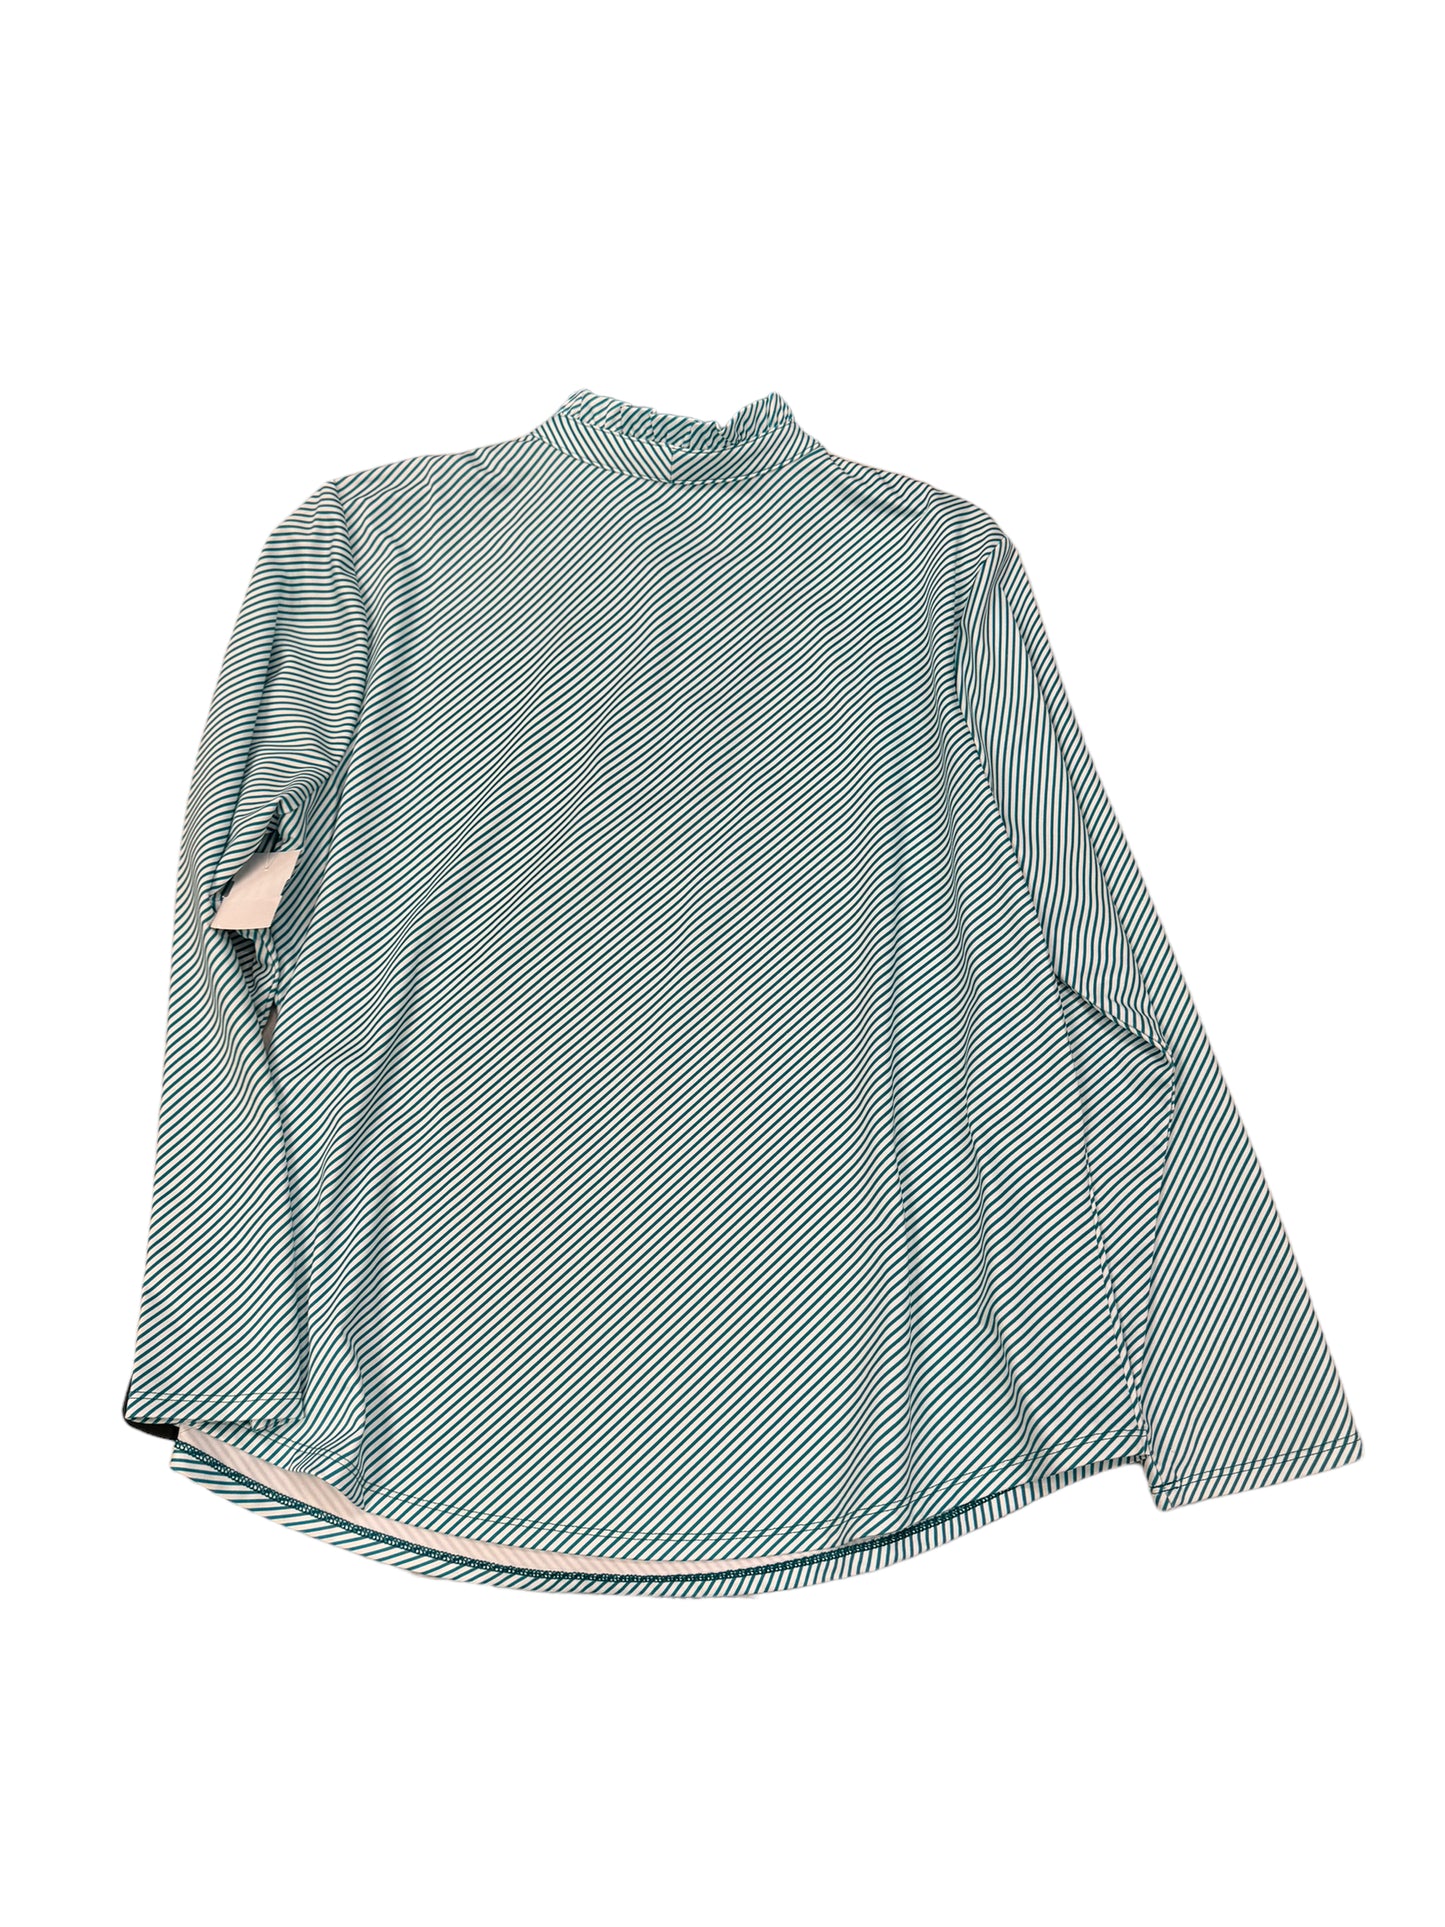 Athletic Top Long Sleeve Collar By Zenergy By Chicos  Size: L